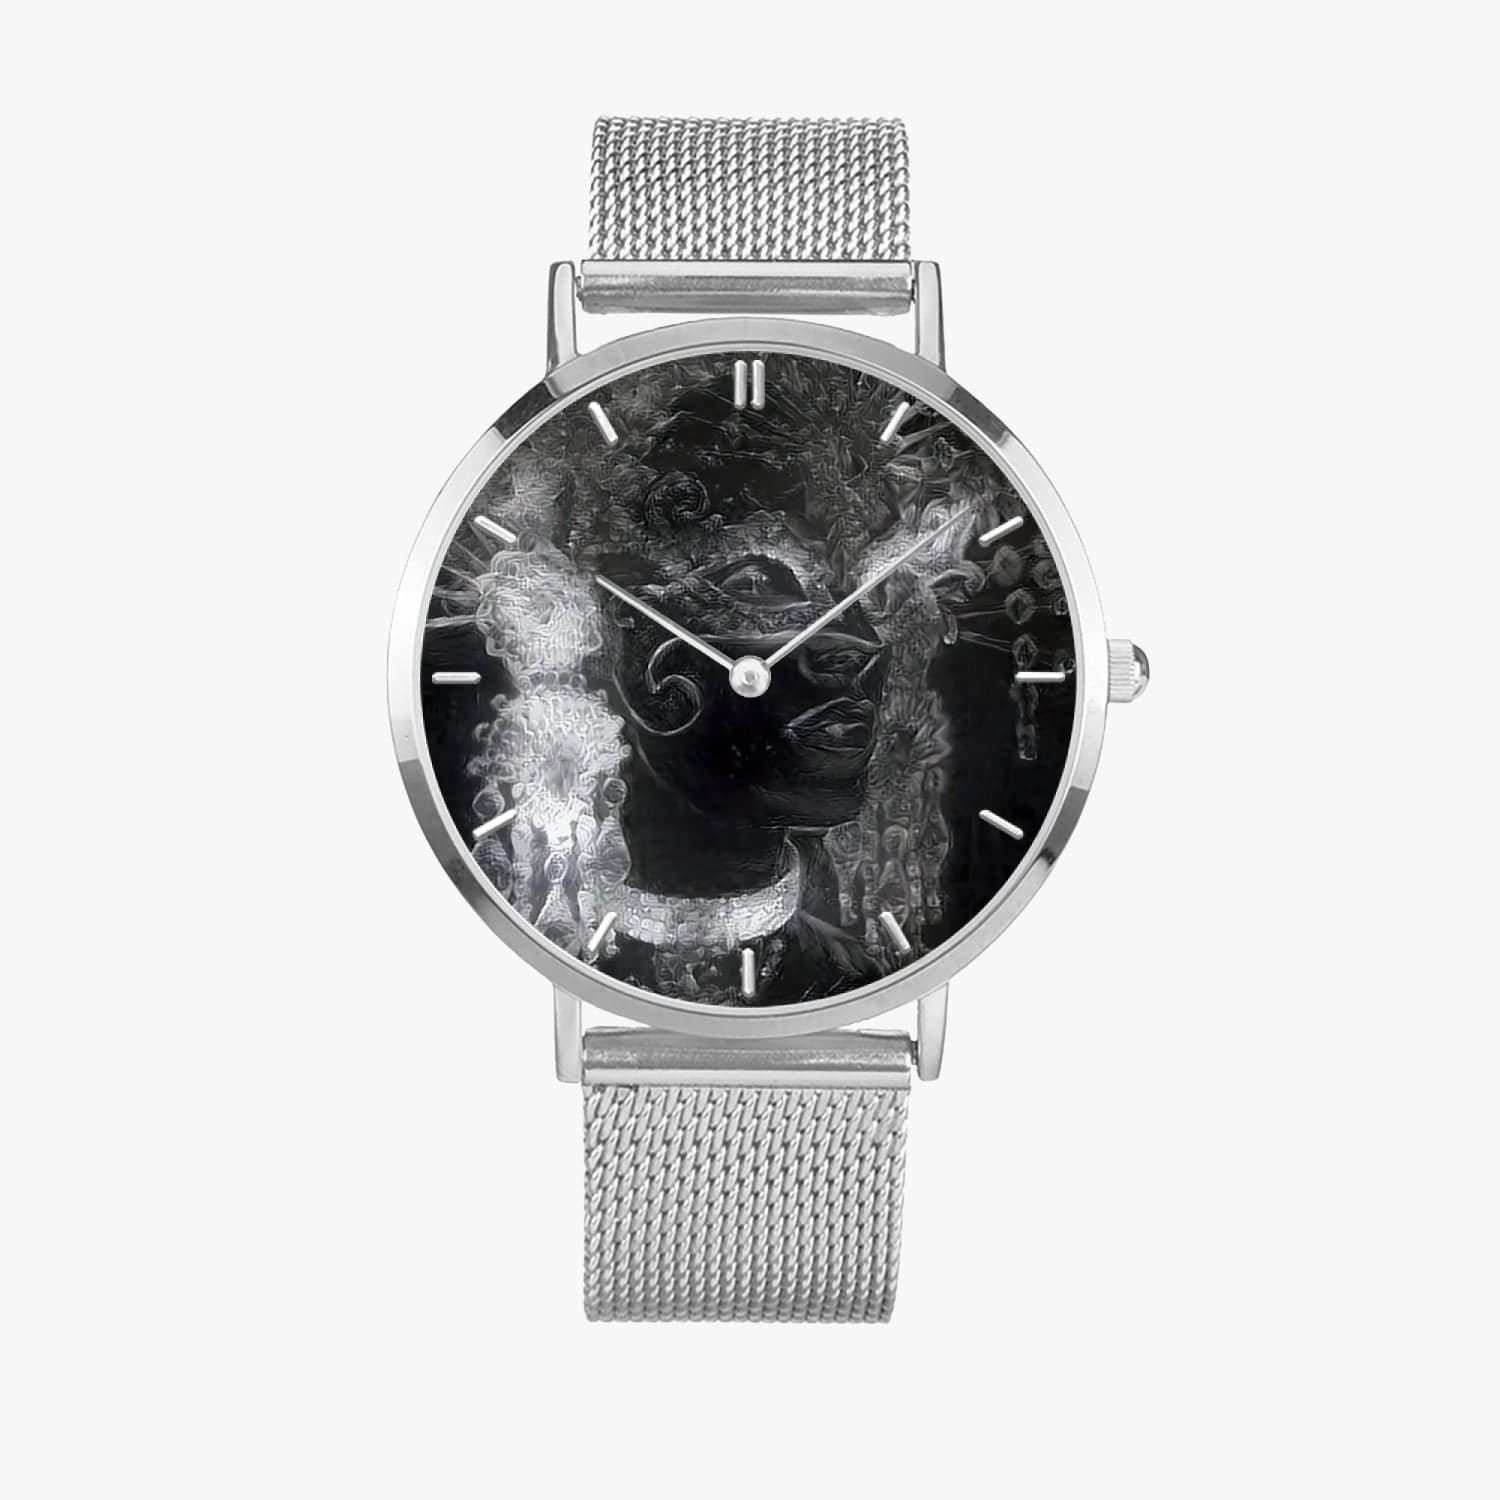 Venetian times -  Ultra-thin Stainless Steel Quartz Watch (With Indicators), by Sensus Studio Design